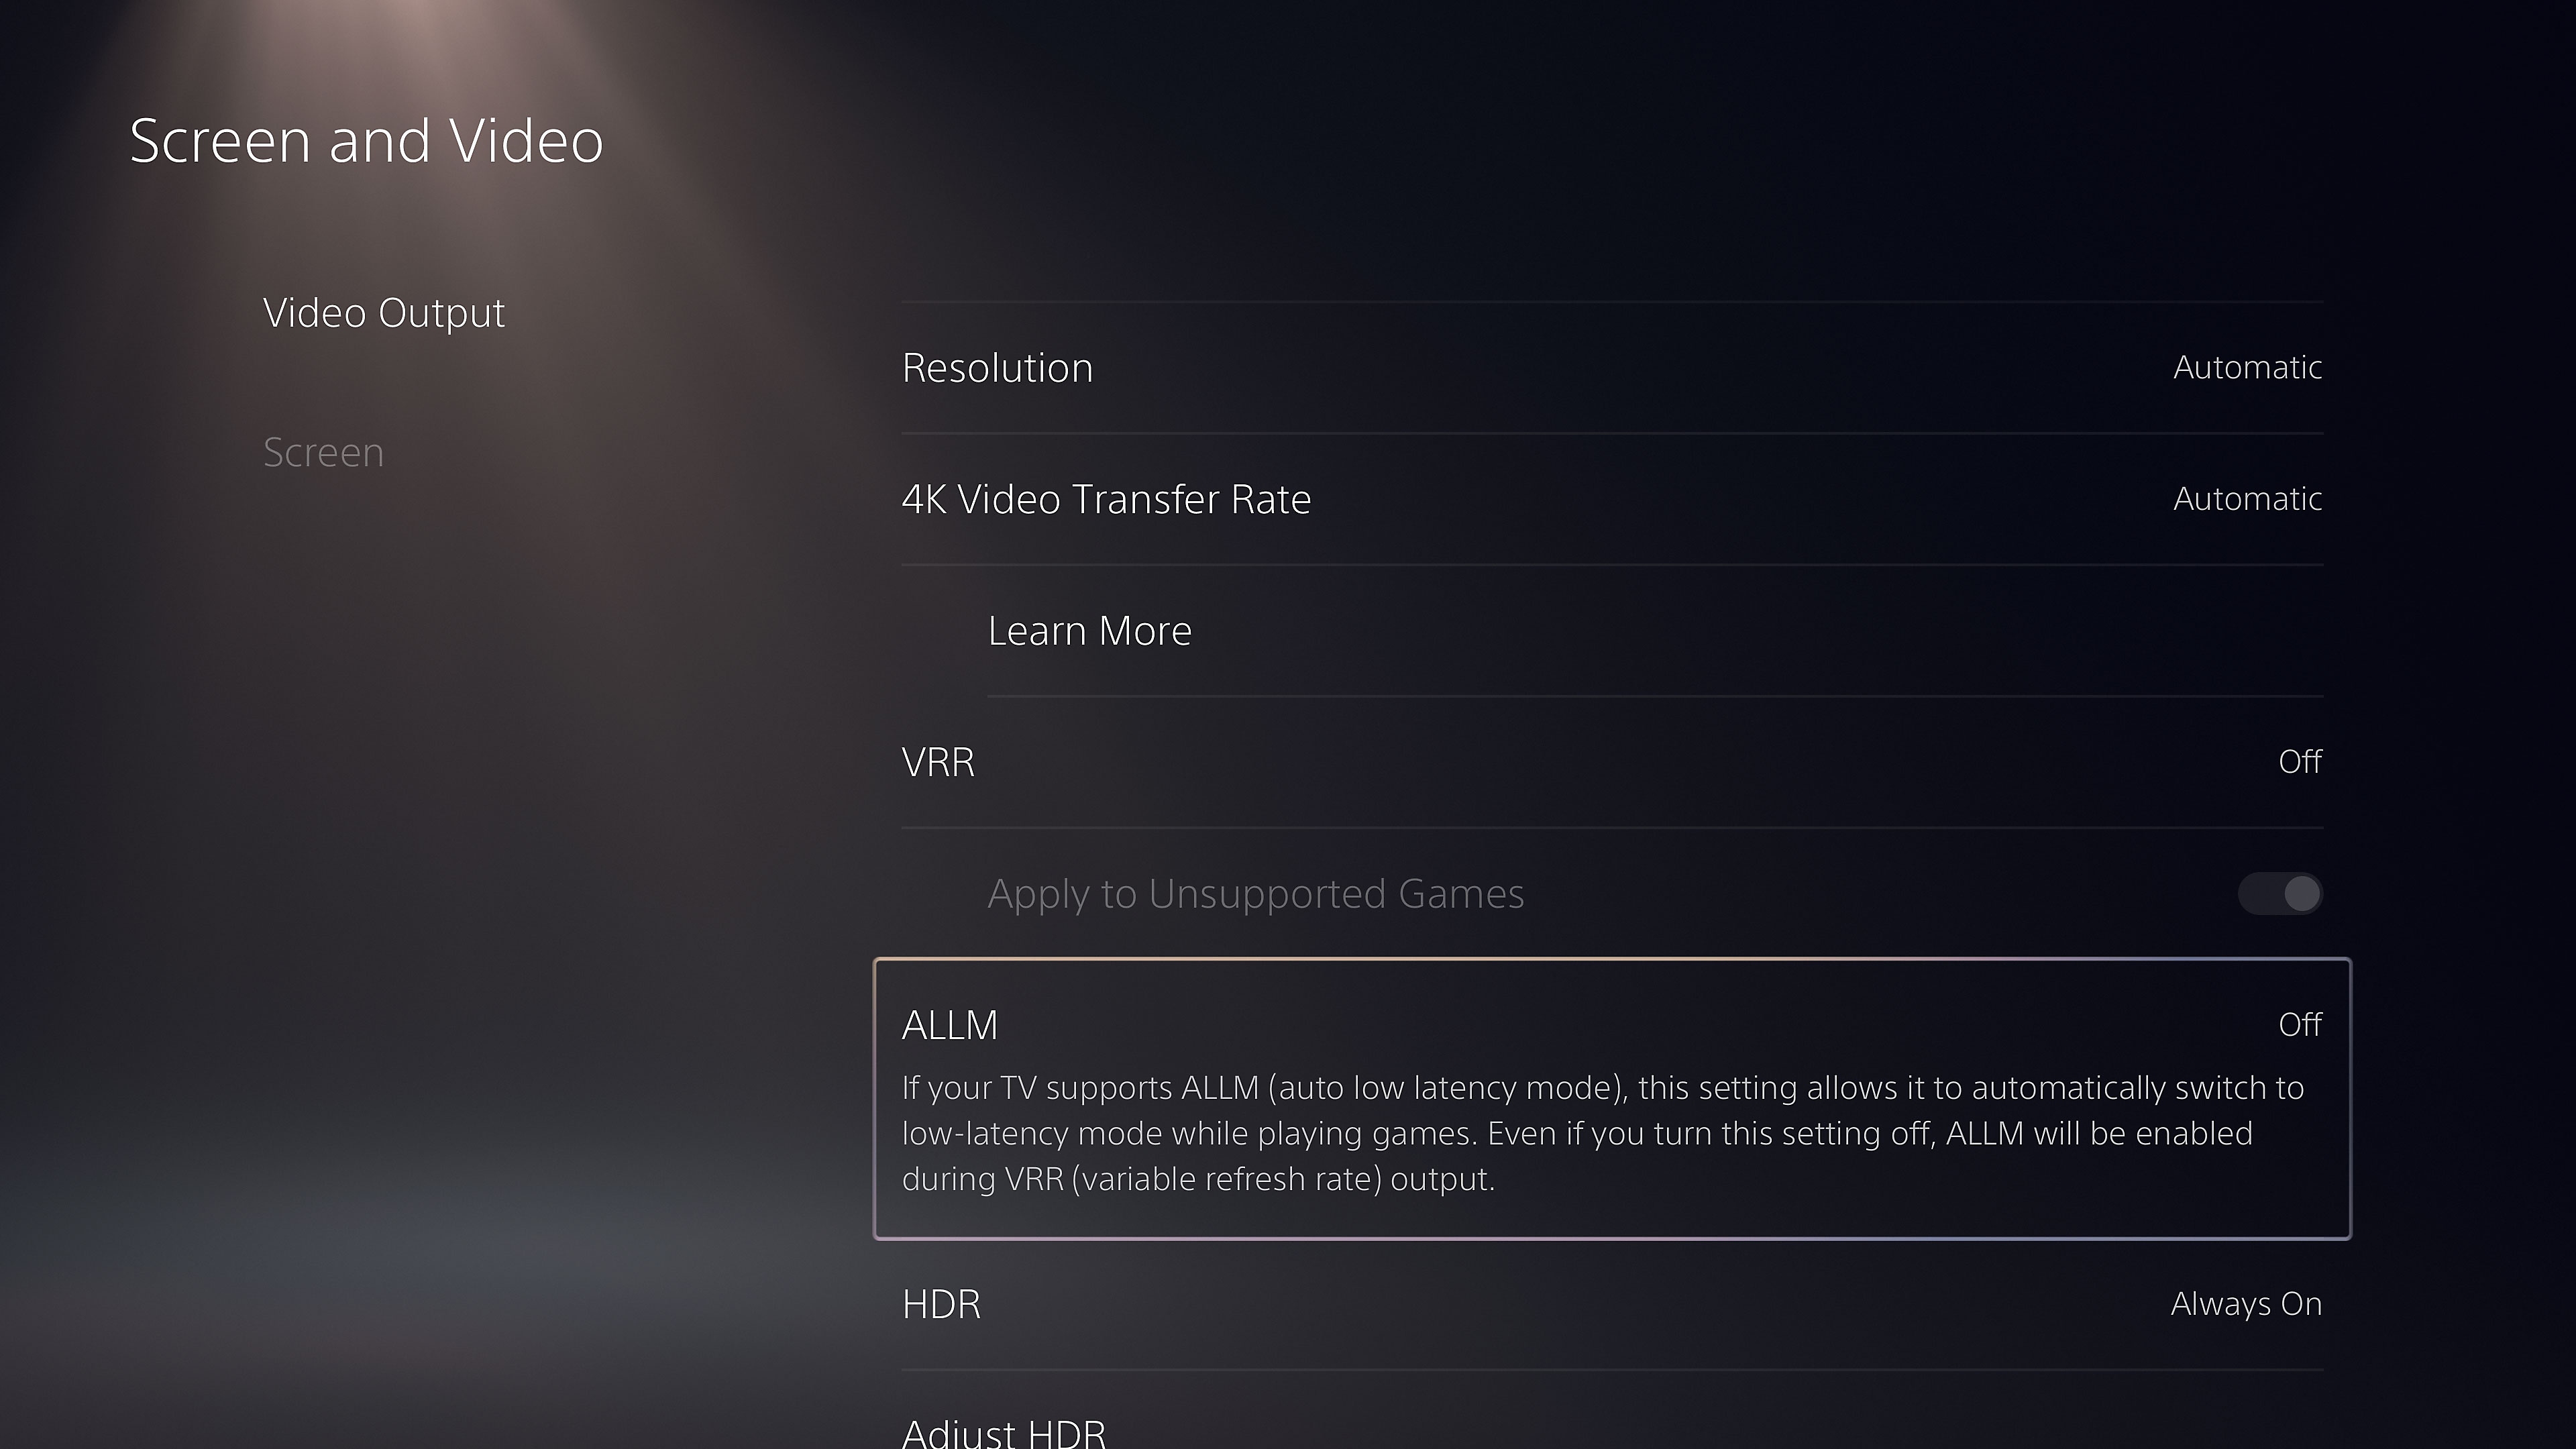 ALLM settings on PS5 consoles